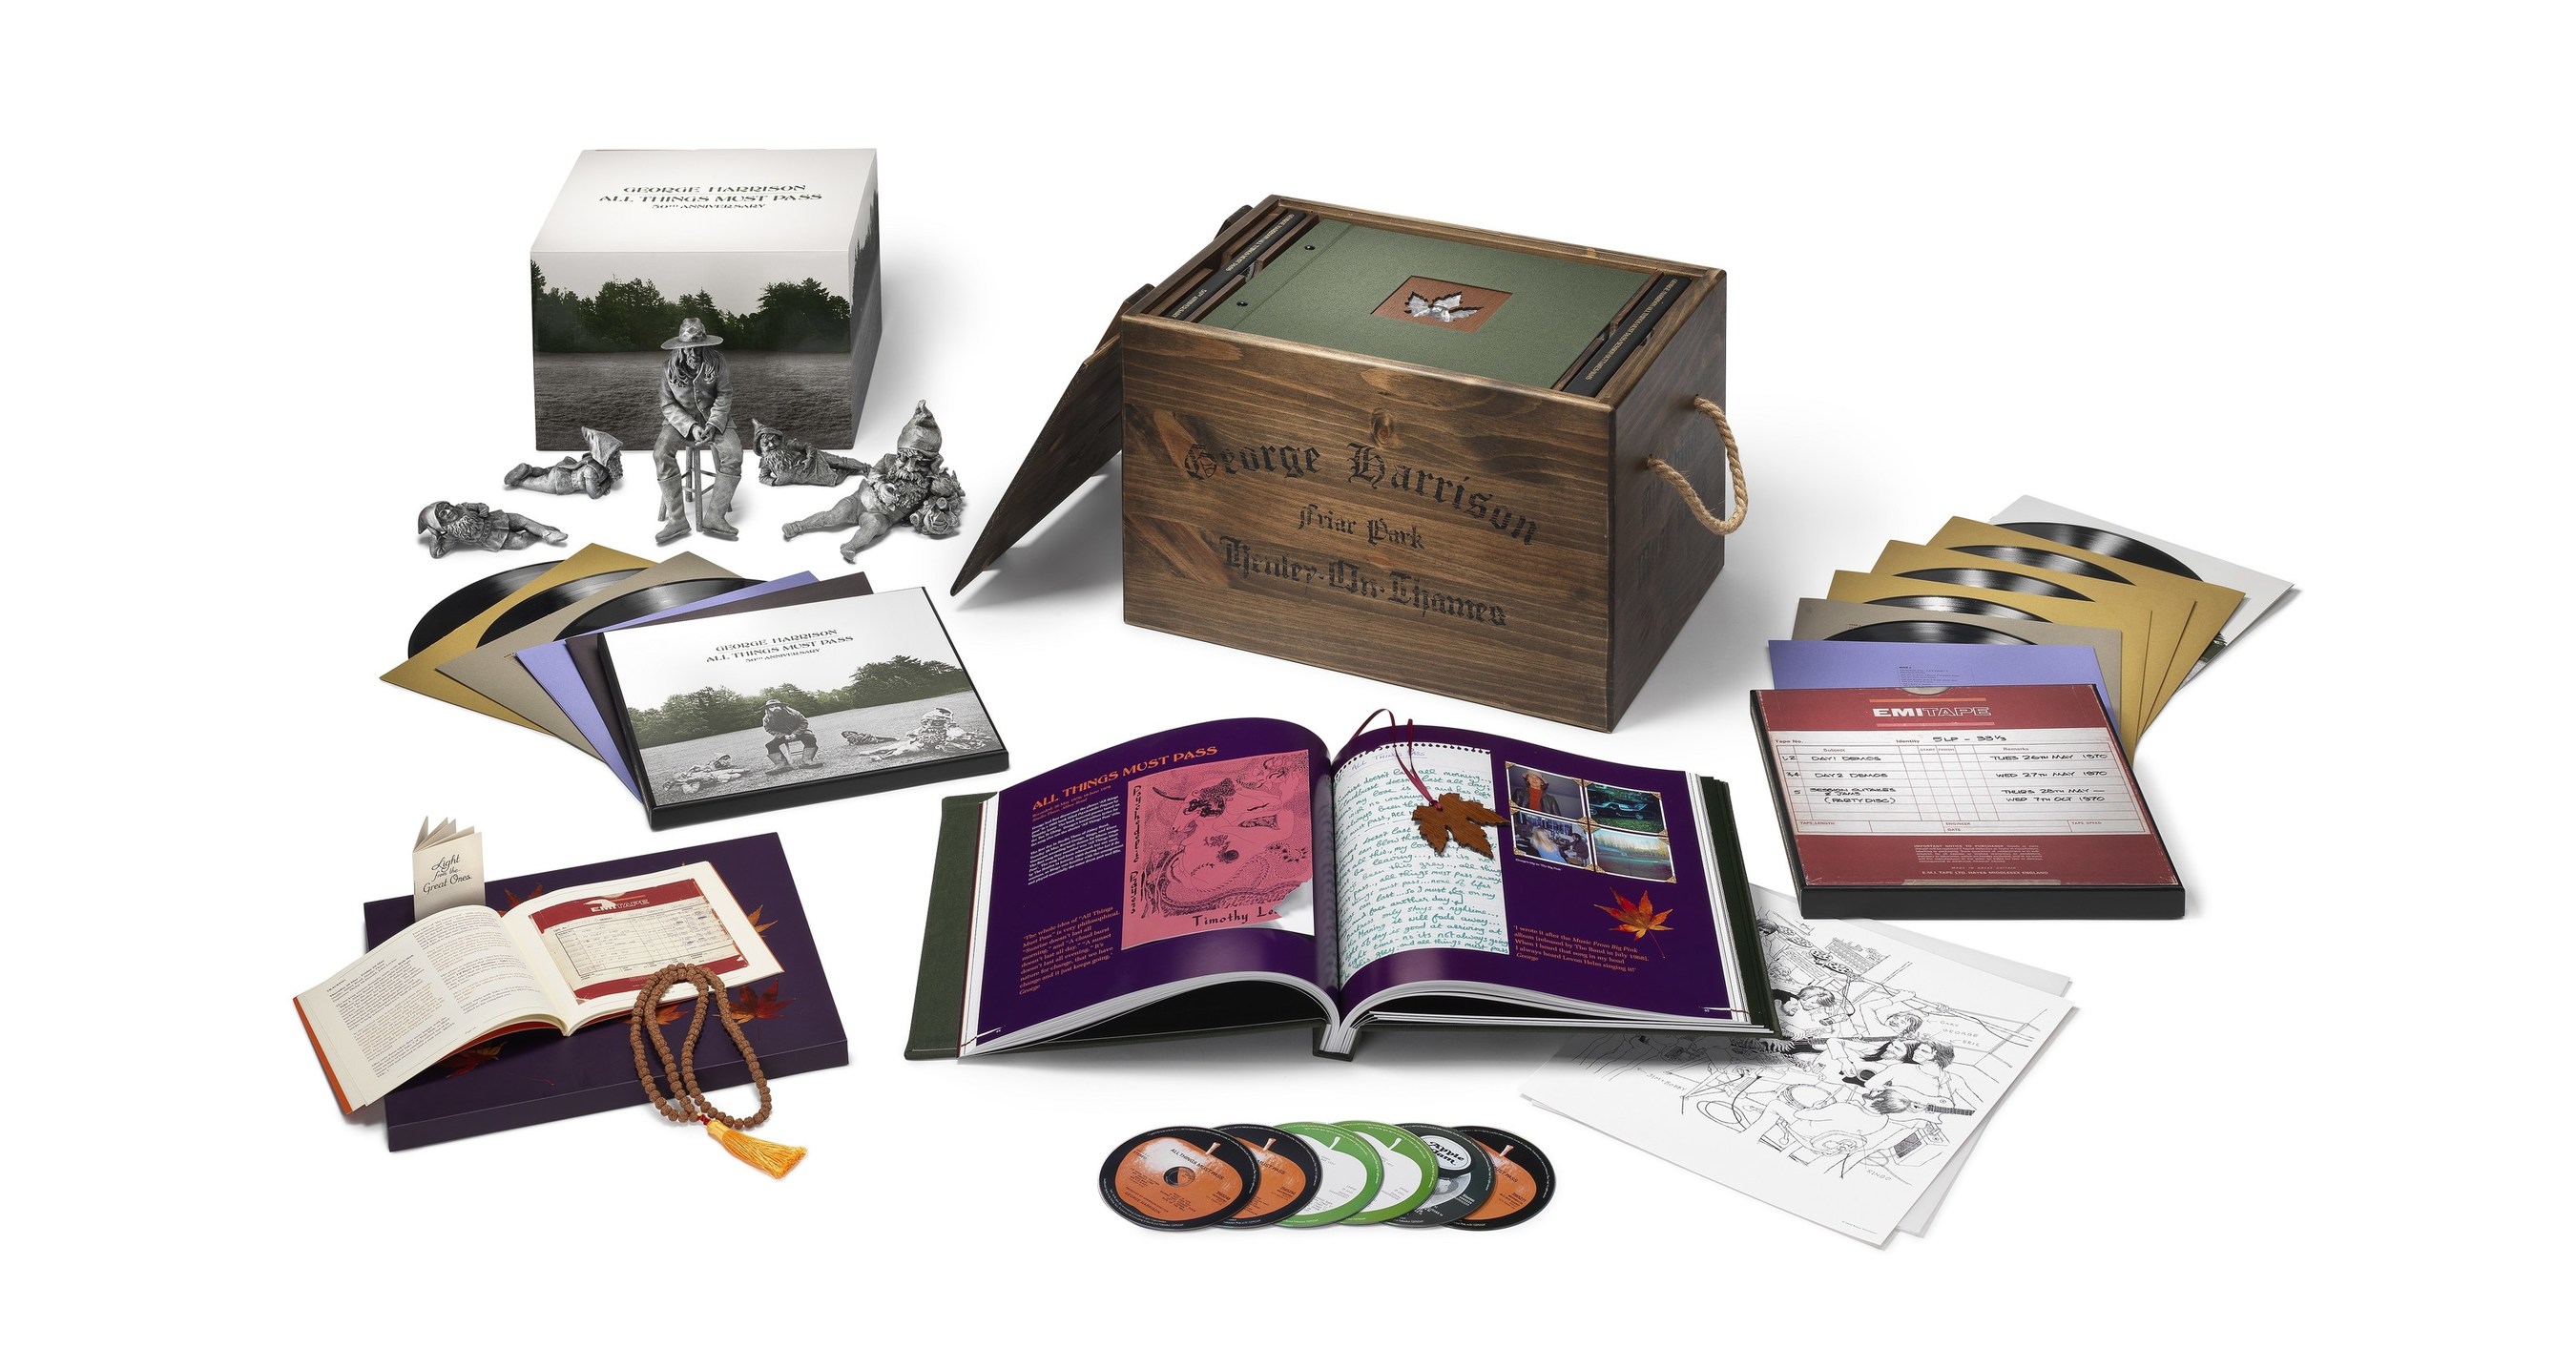 George Harrison S All Things Must Pass 50th Anniversary Edition Wins Grammy Award For Best Boxed Or Special Limited Edition Package At 64th Annual Grammy Awards